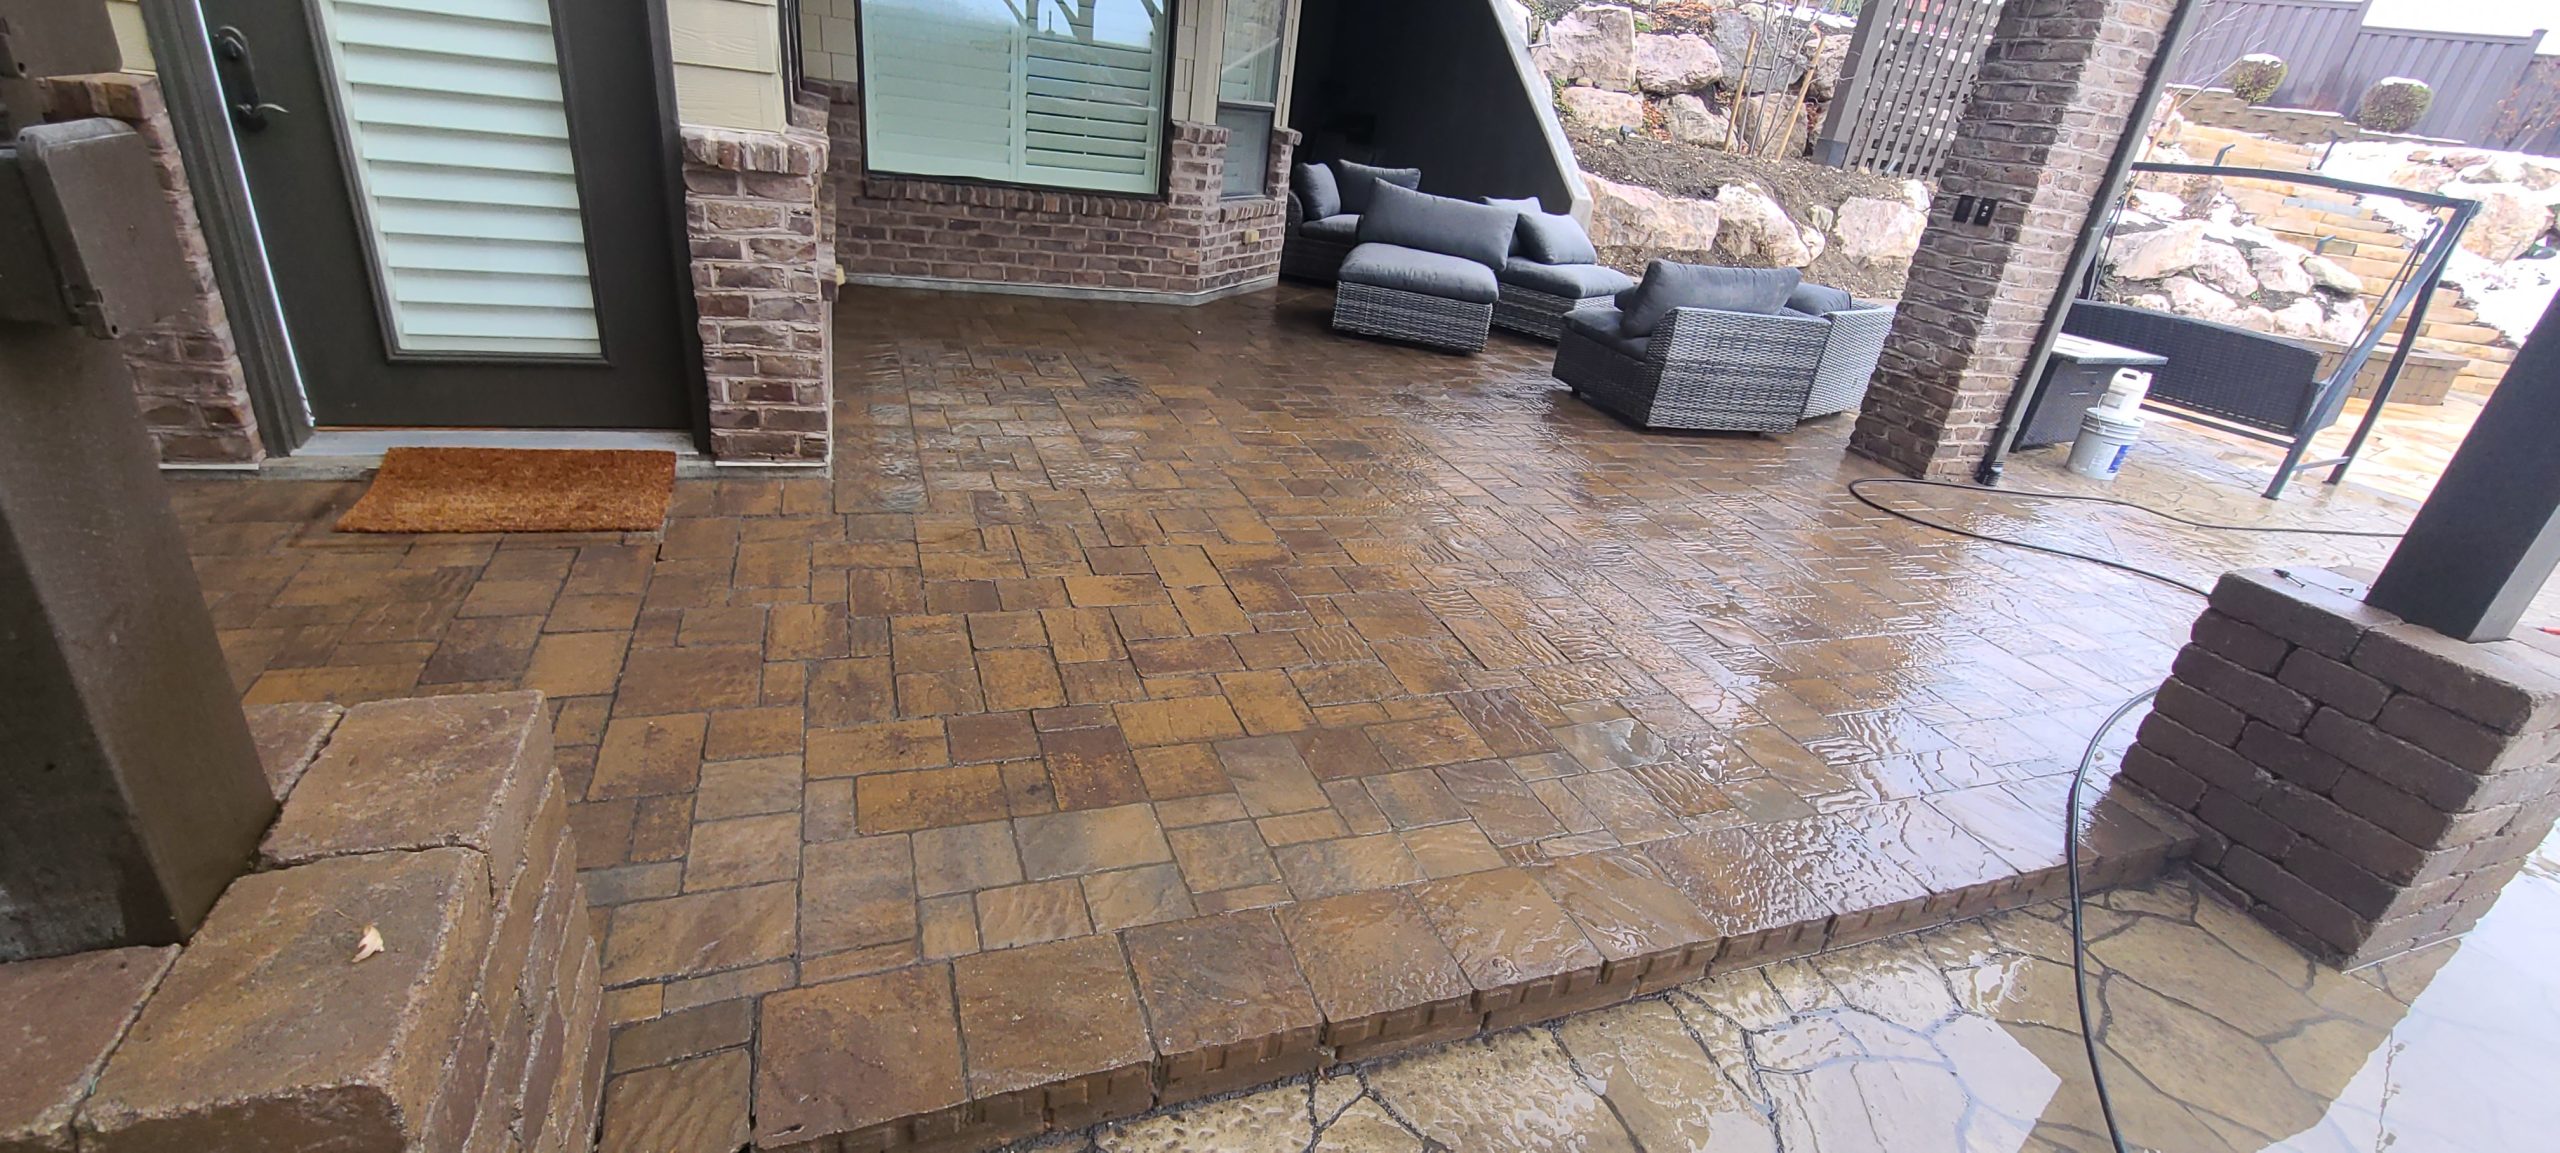 Pressure Washing and Paver Cleaning After Construction in Salt Lake City, UT